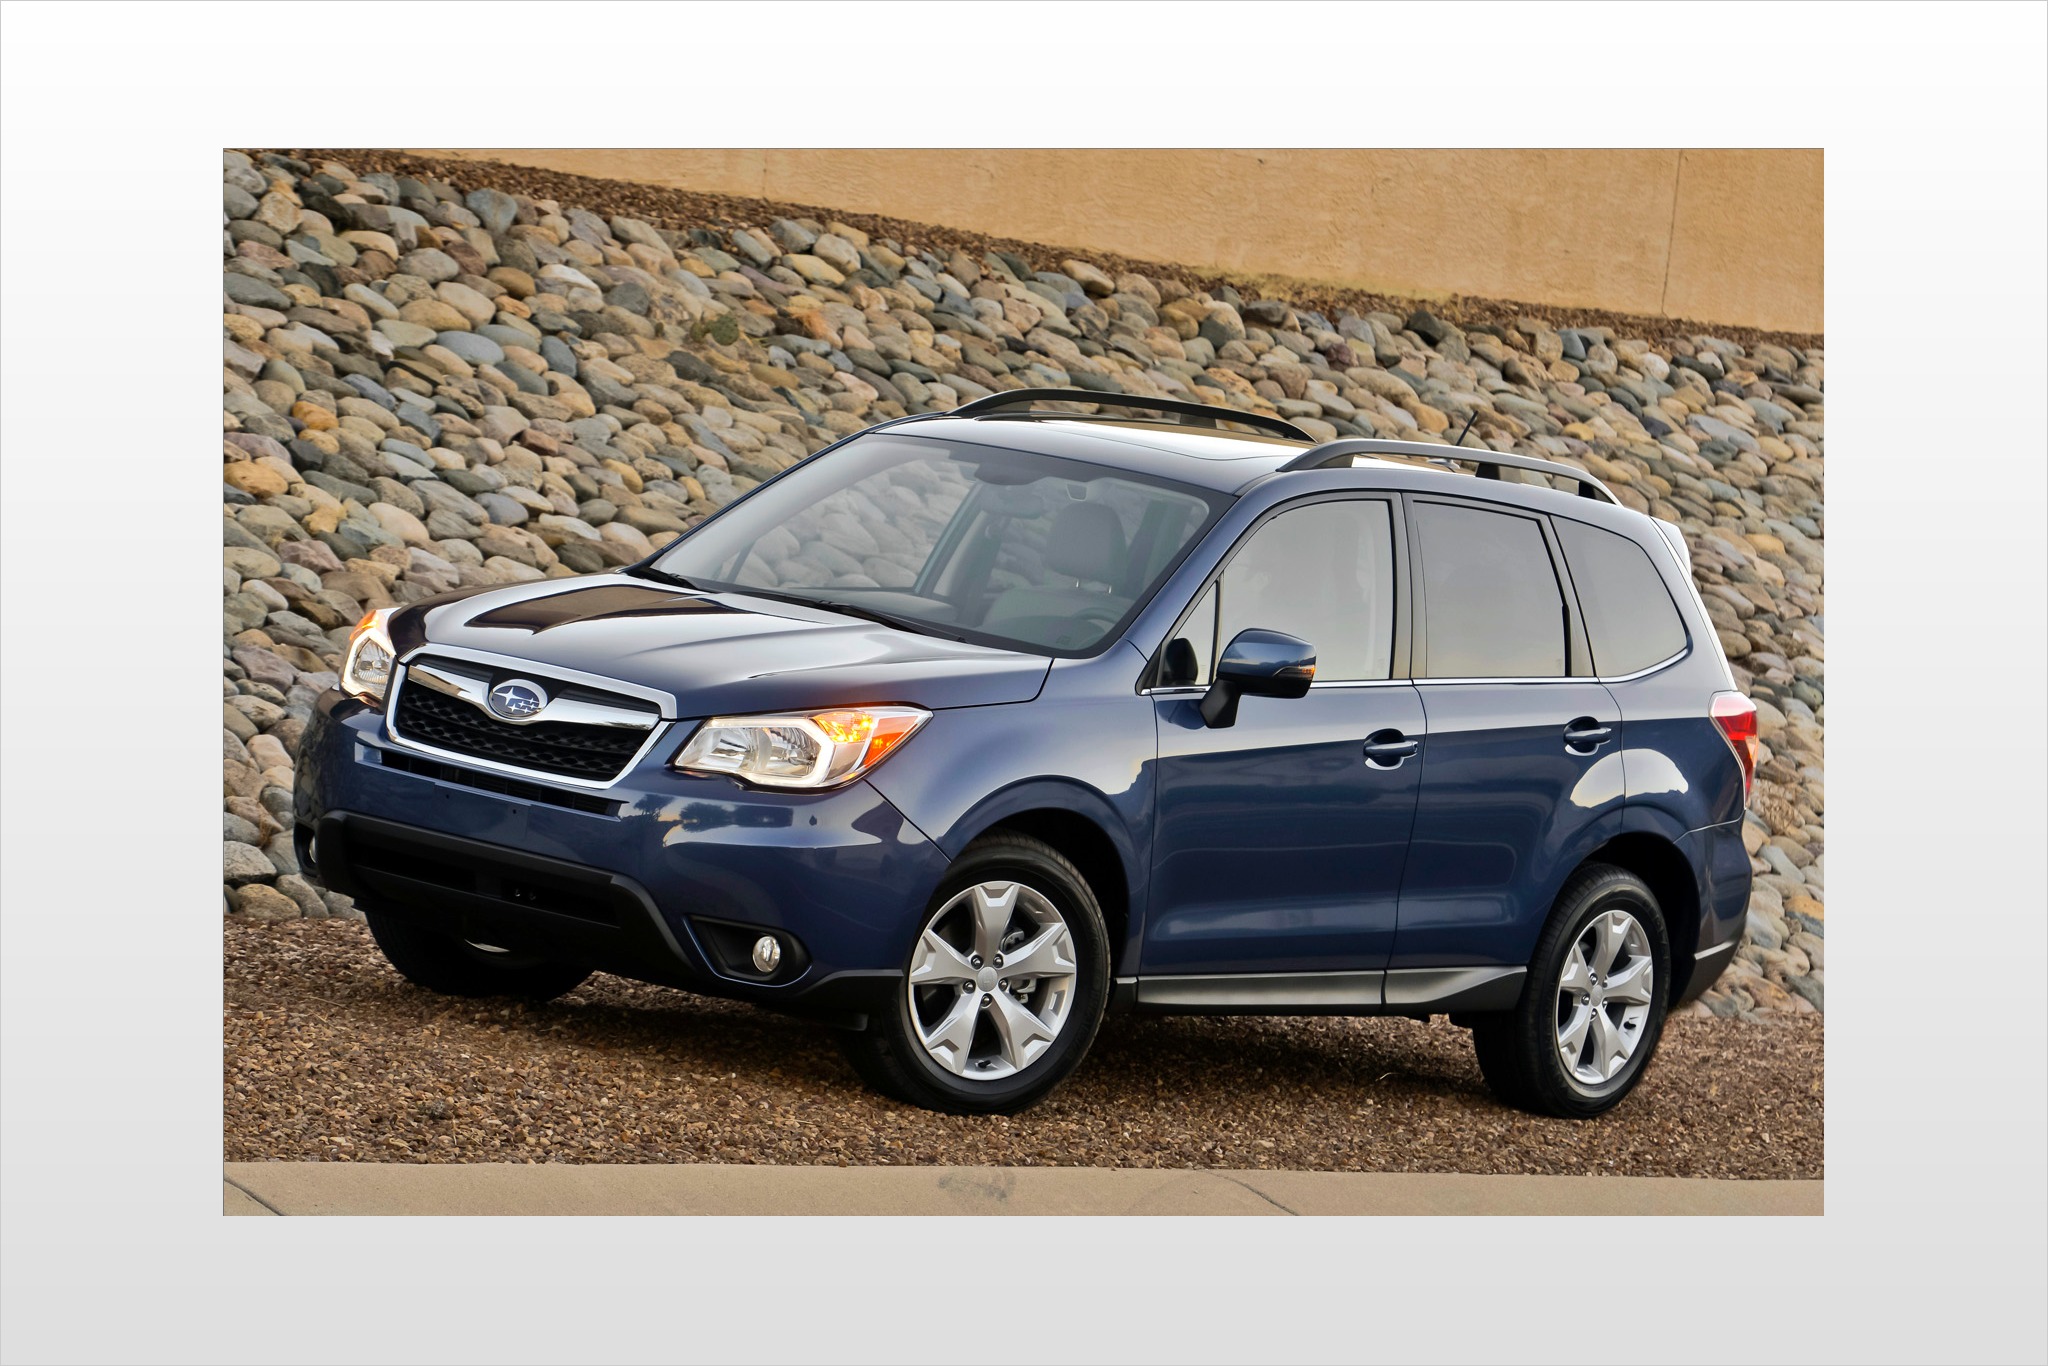 2015 Subaru Forester 2.5i VIN Number Search AutoDetective